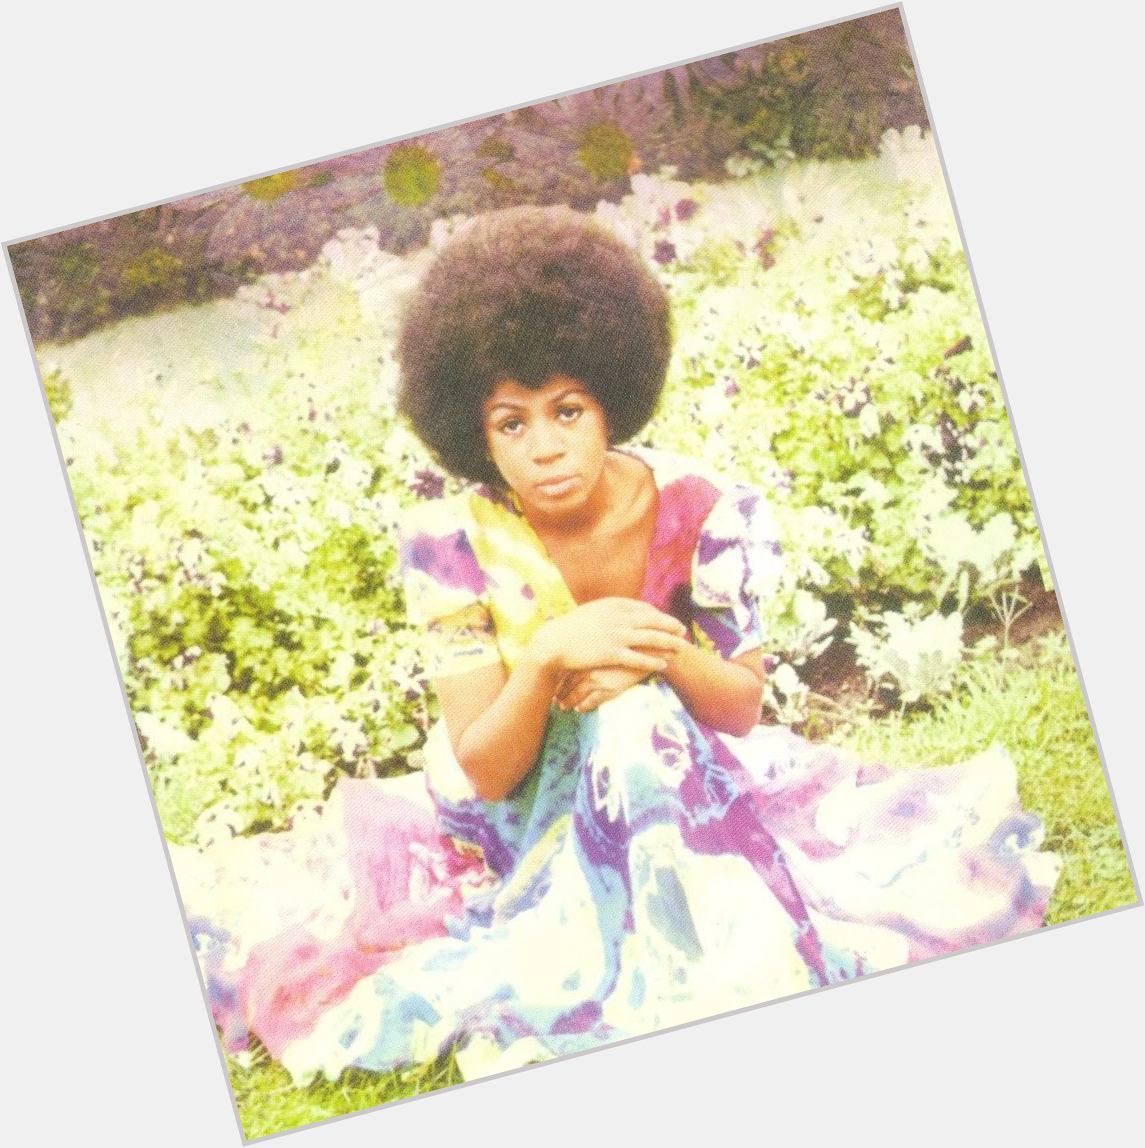 Happy Birthday to Minnie Riperton, who would have turned 68 today! 